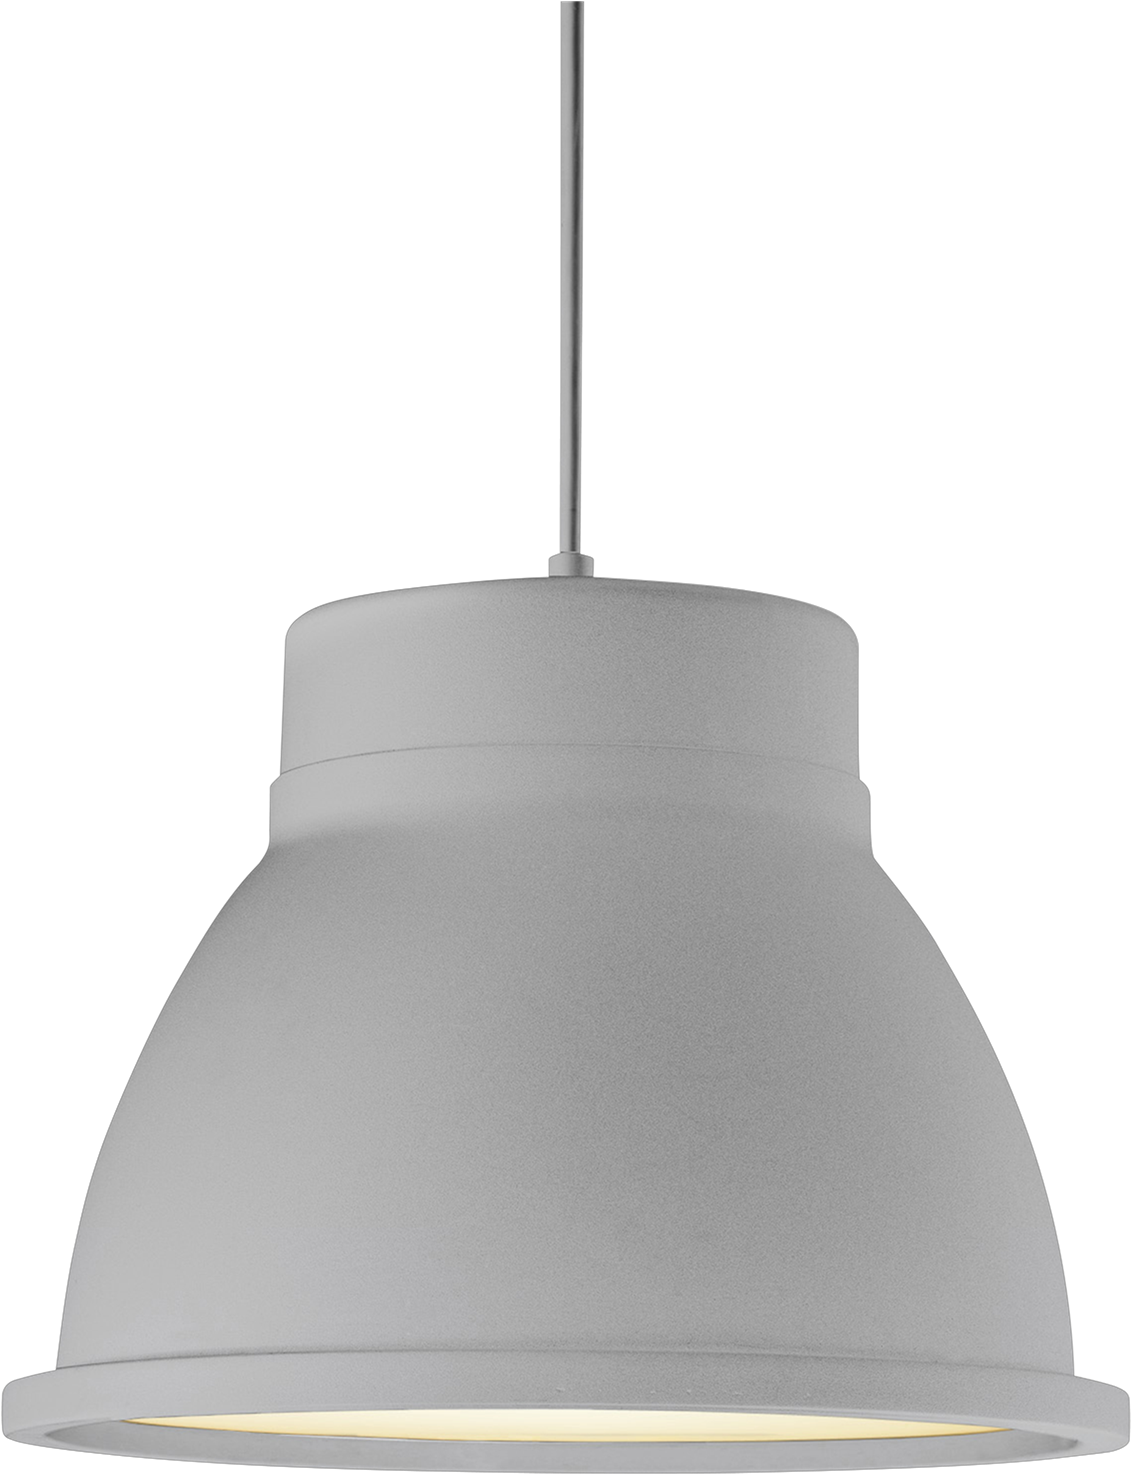 A White Light Fixture With A Black Background